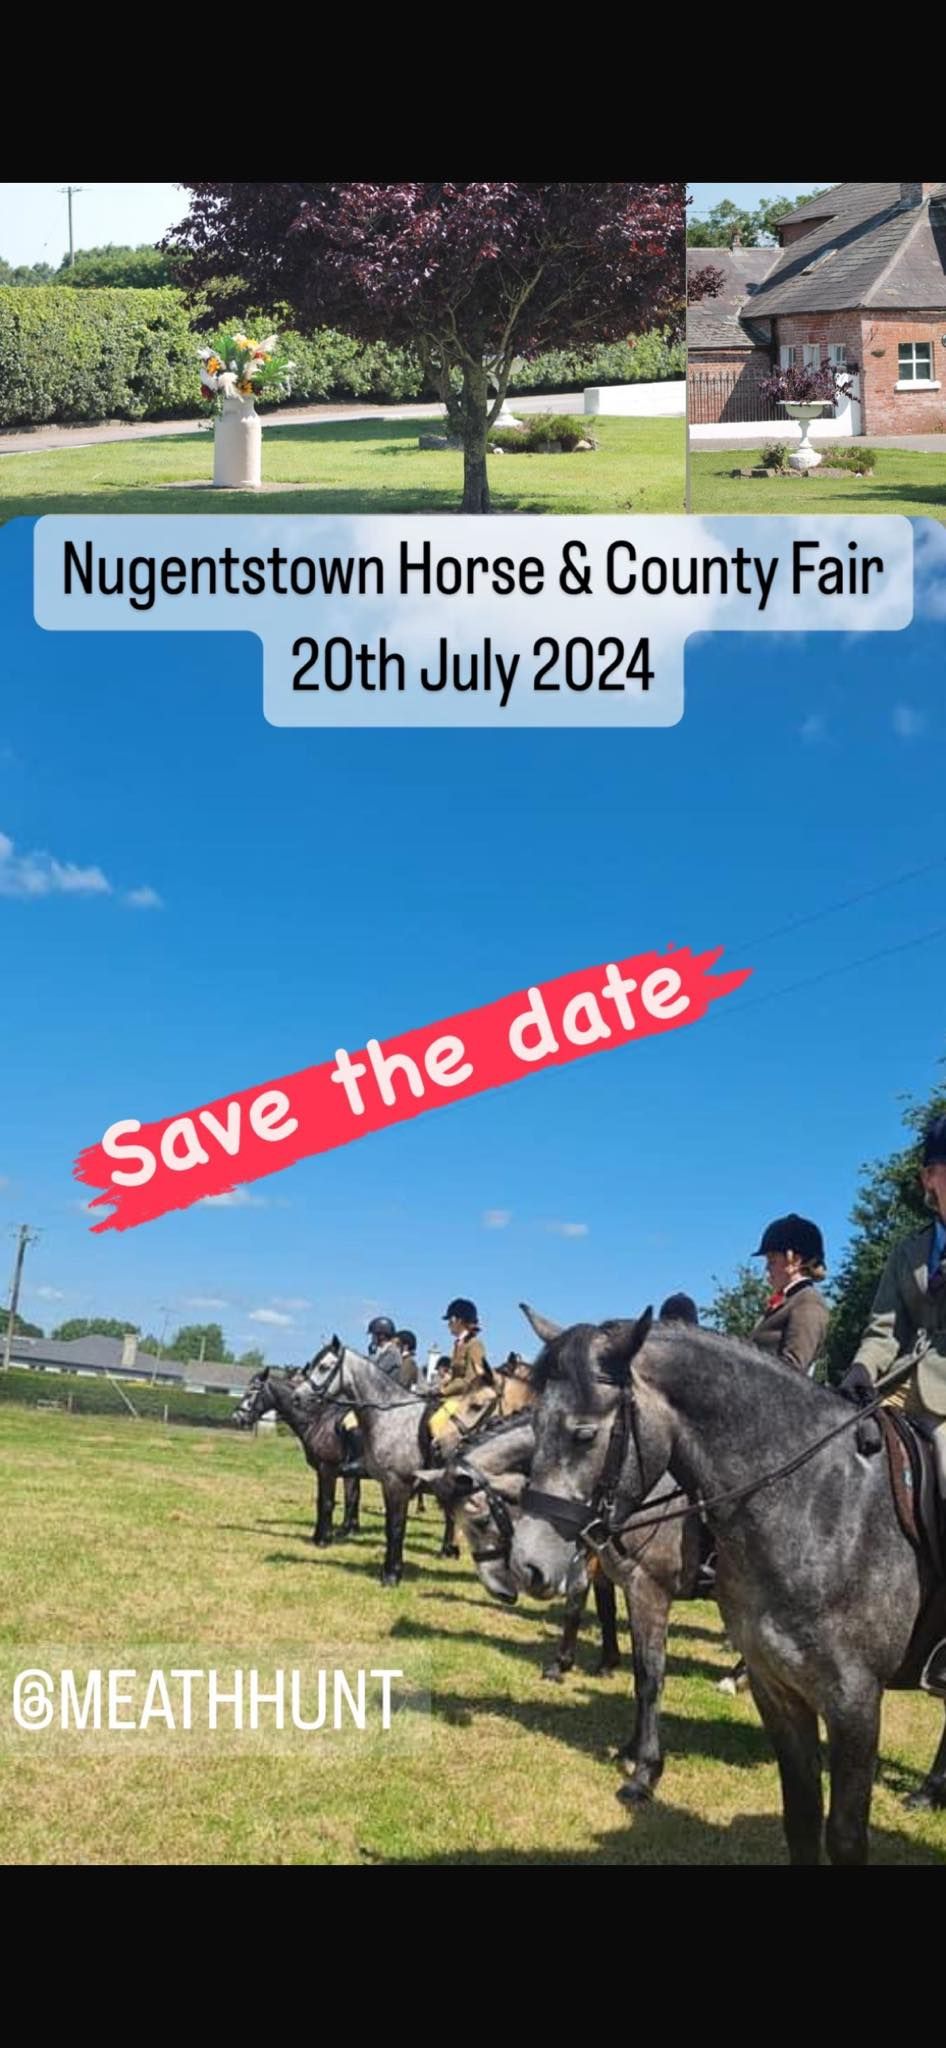 Nugentstown Horse & Country Fair 